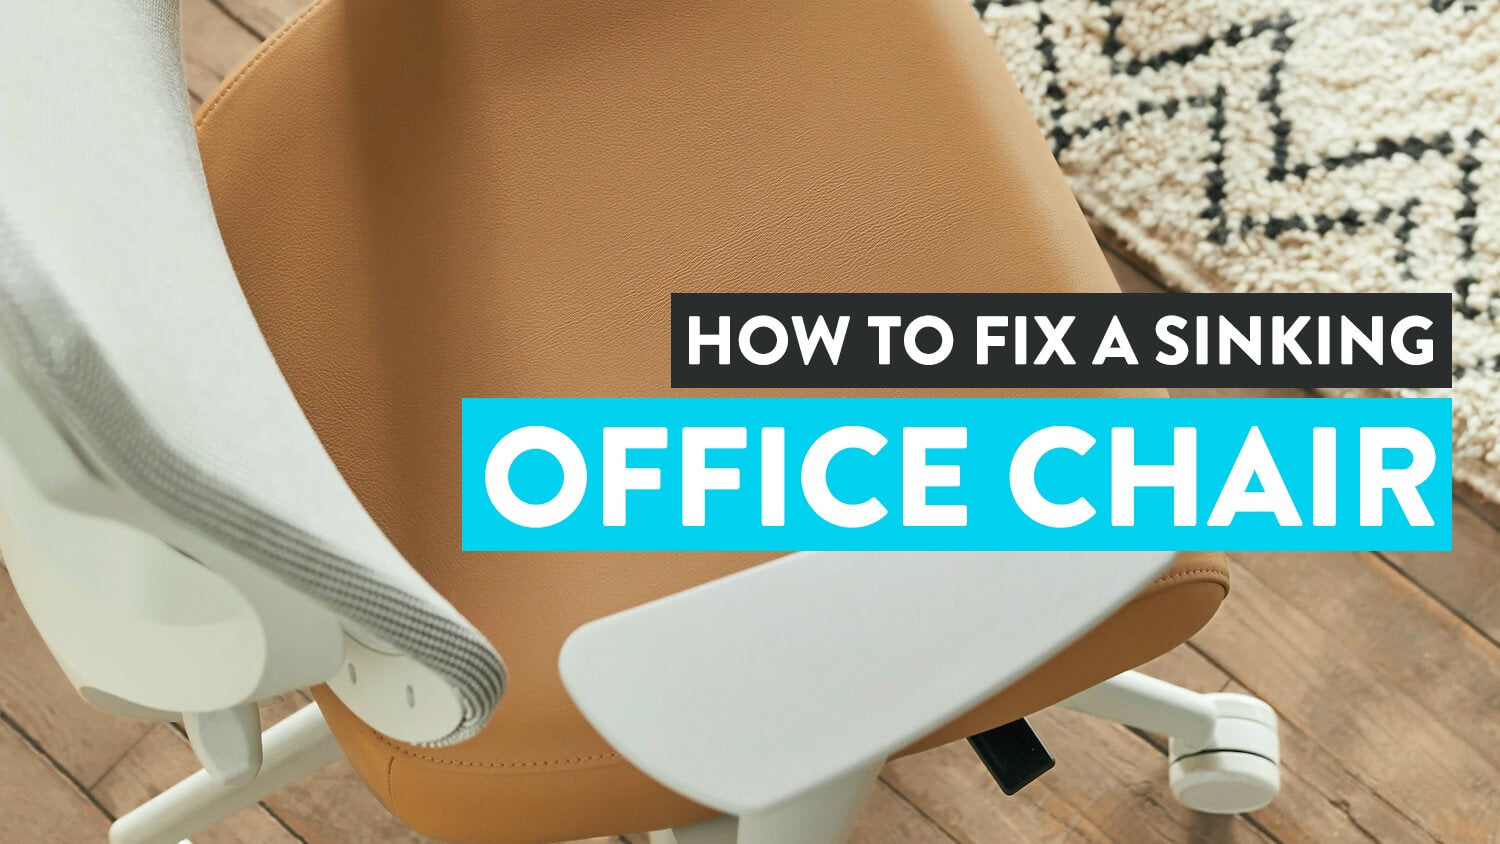 Office Chair Buddy - Fix Your Sinking Office Chair in Minutes - No Tools Needed - Supports Up to 300 Pounds